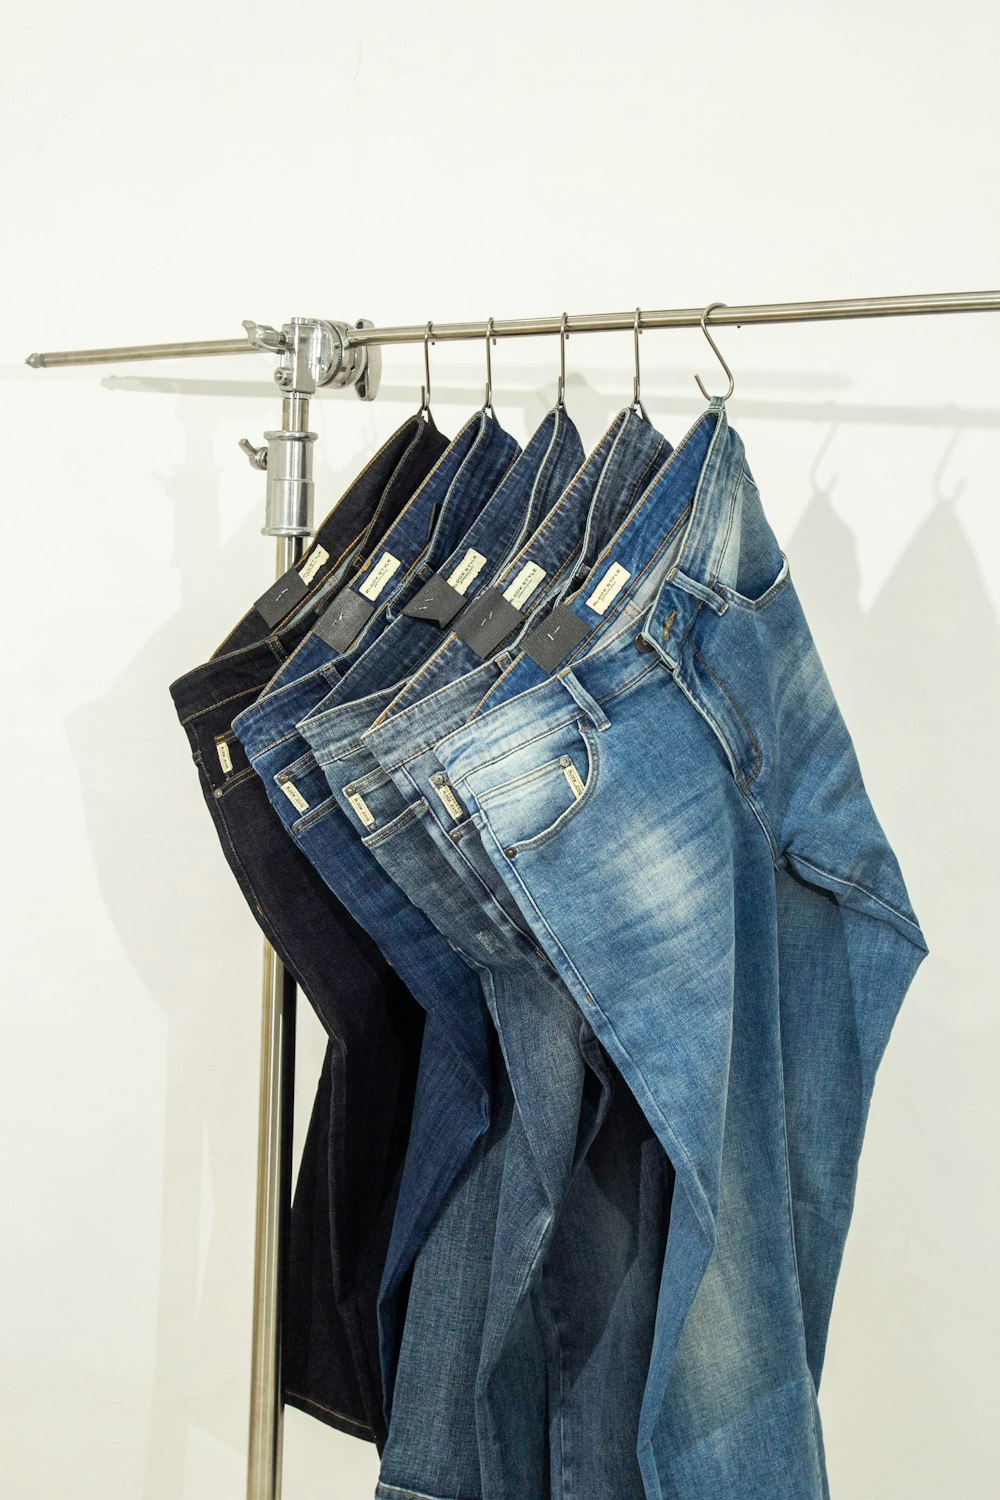 five pairs of jeans hanging on a clothes rack